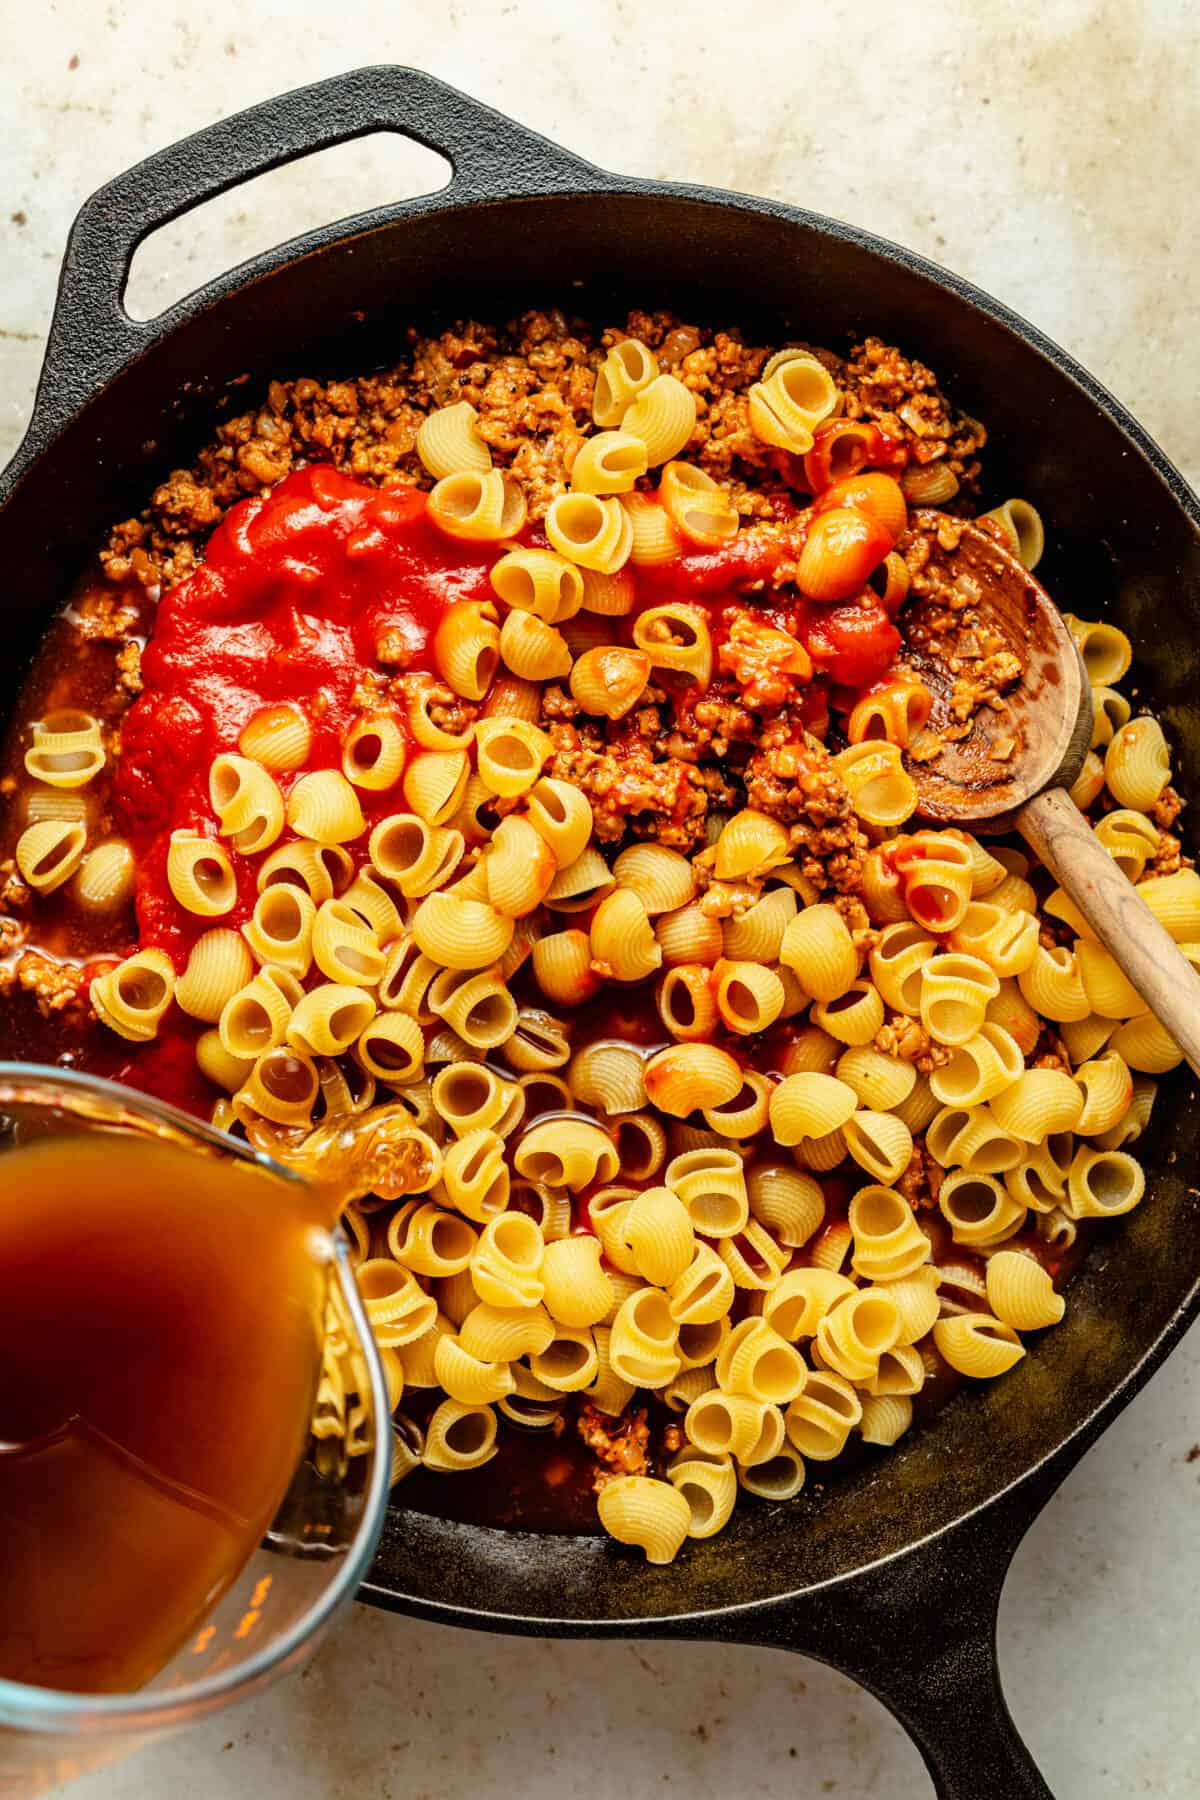 Black cast iron skillet filled with browned ground beef, dry pasta shells, red sauce and broth pouring in.